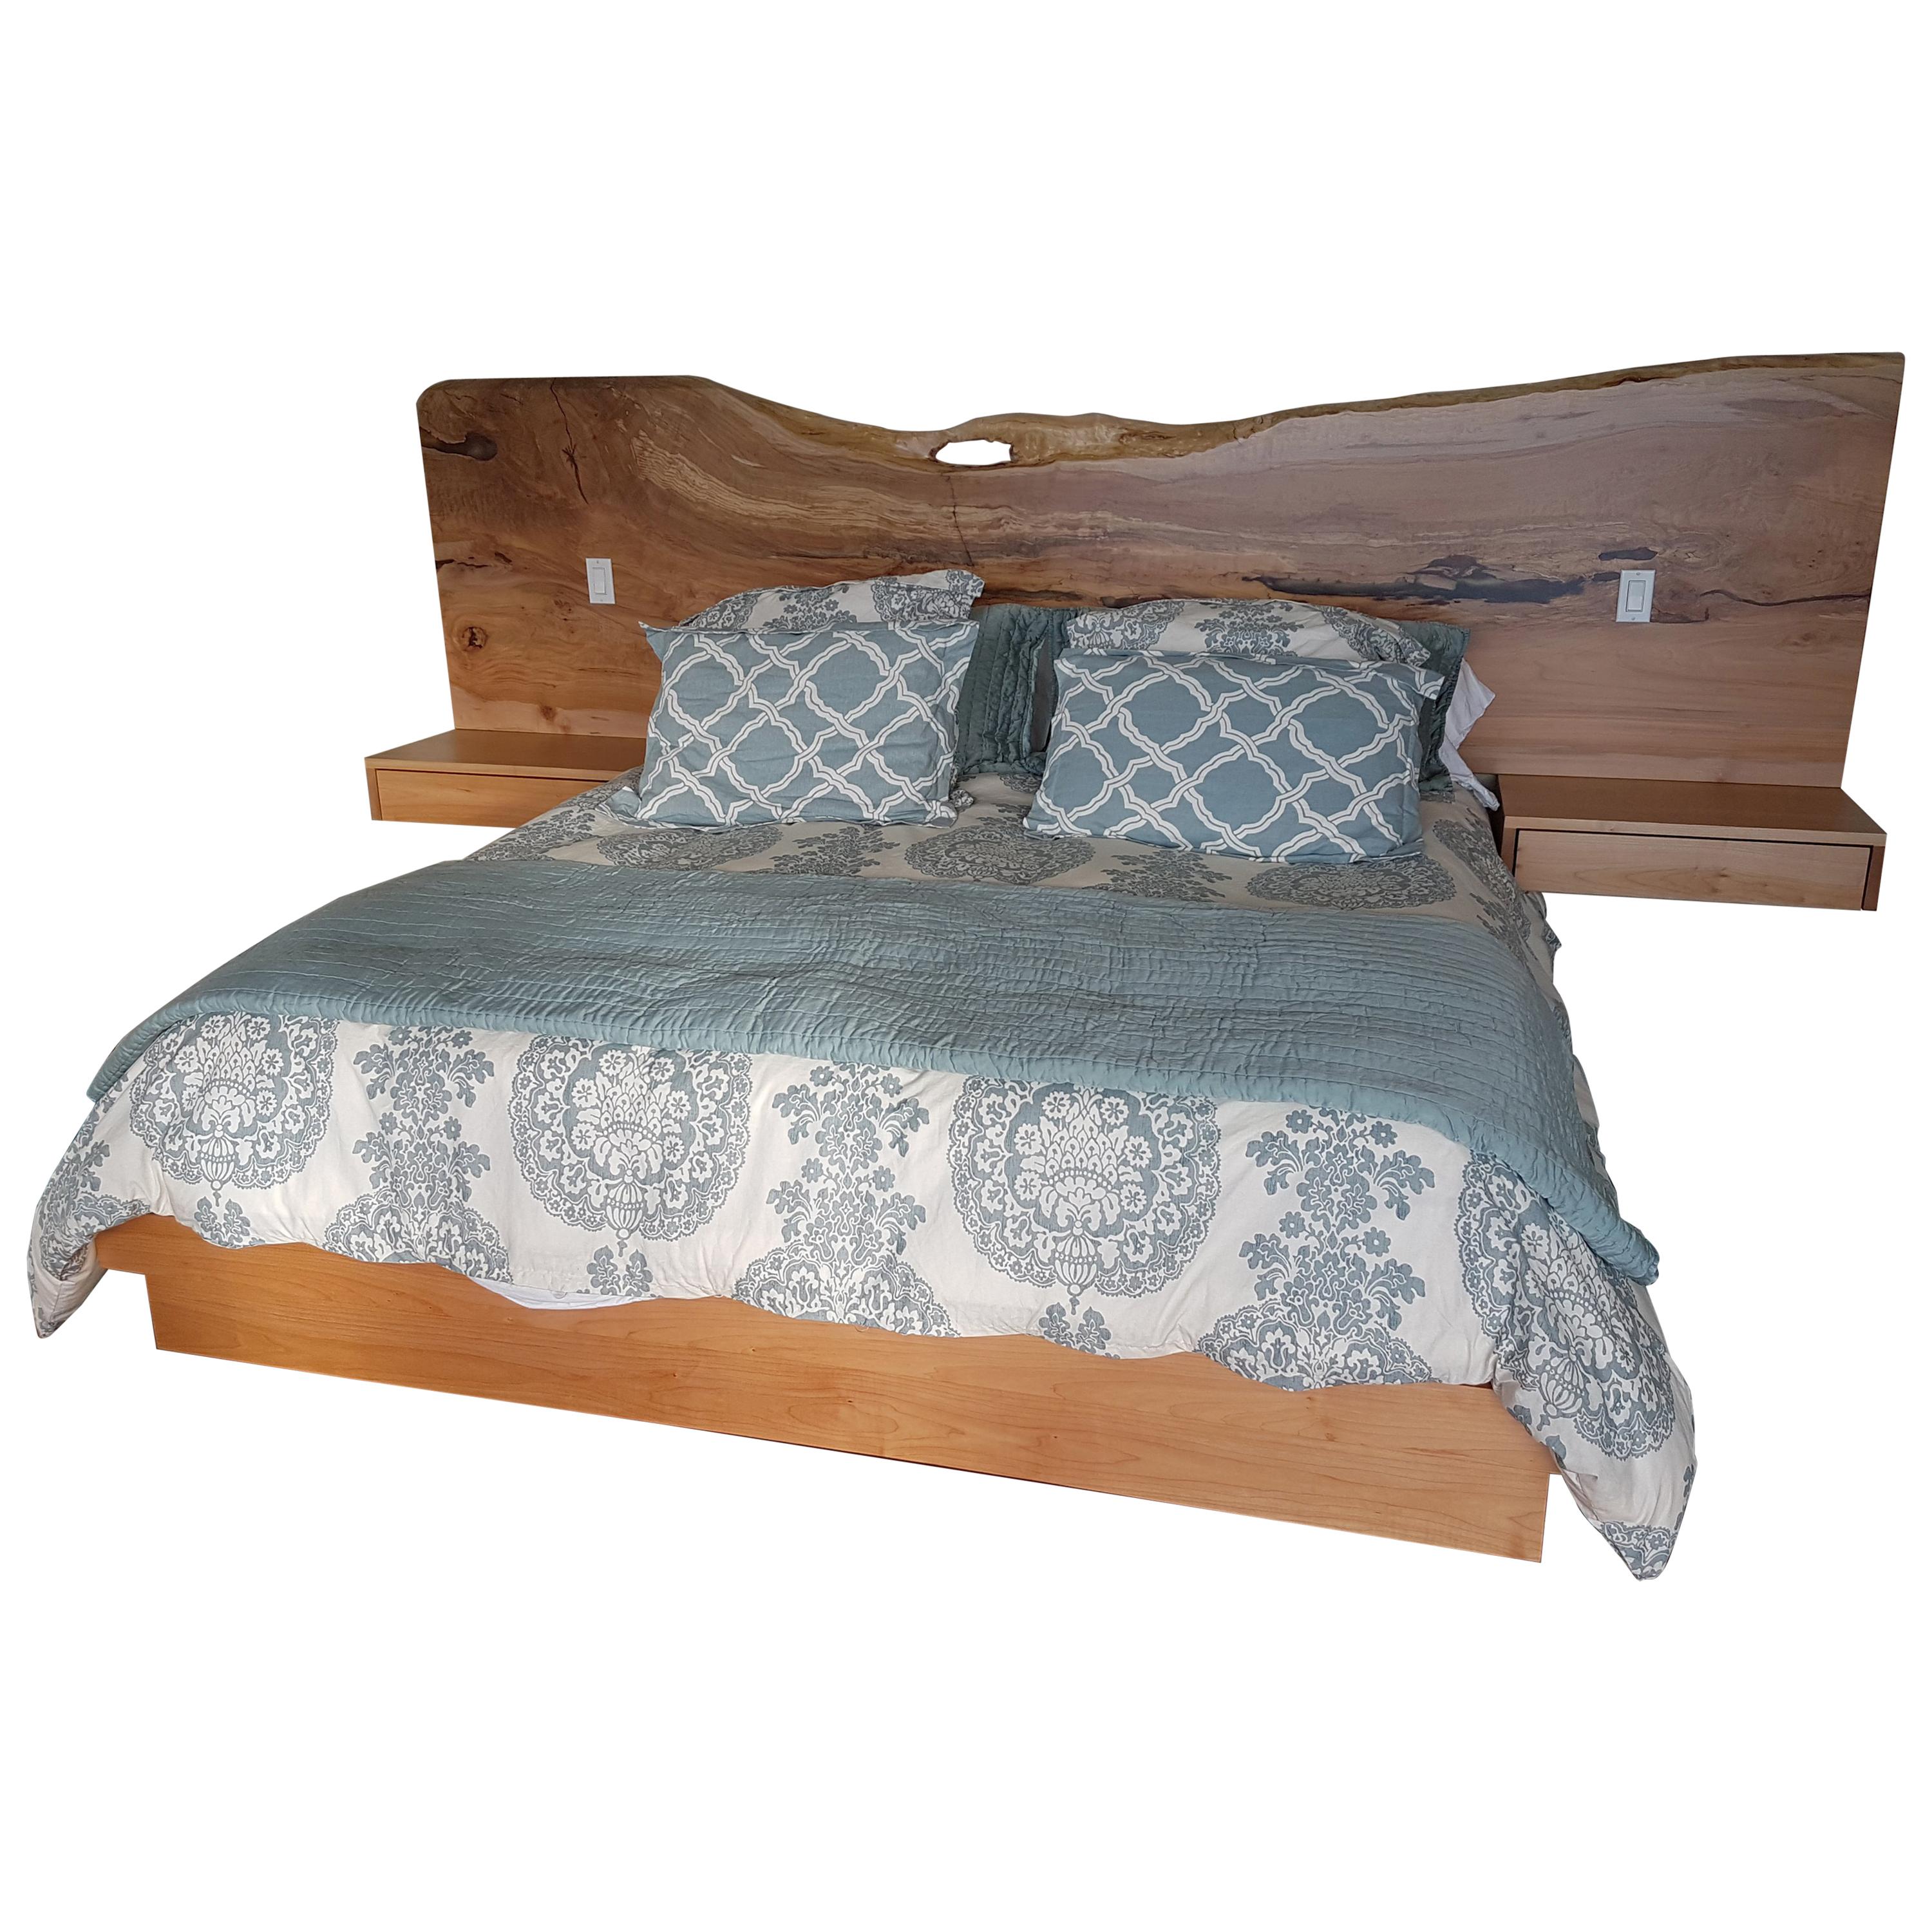 Wall Hung Headboard with Attached Nightstands For Sale